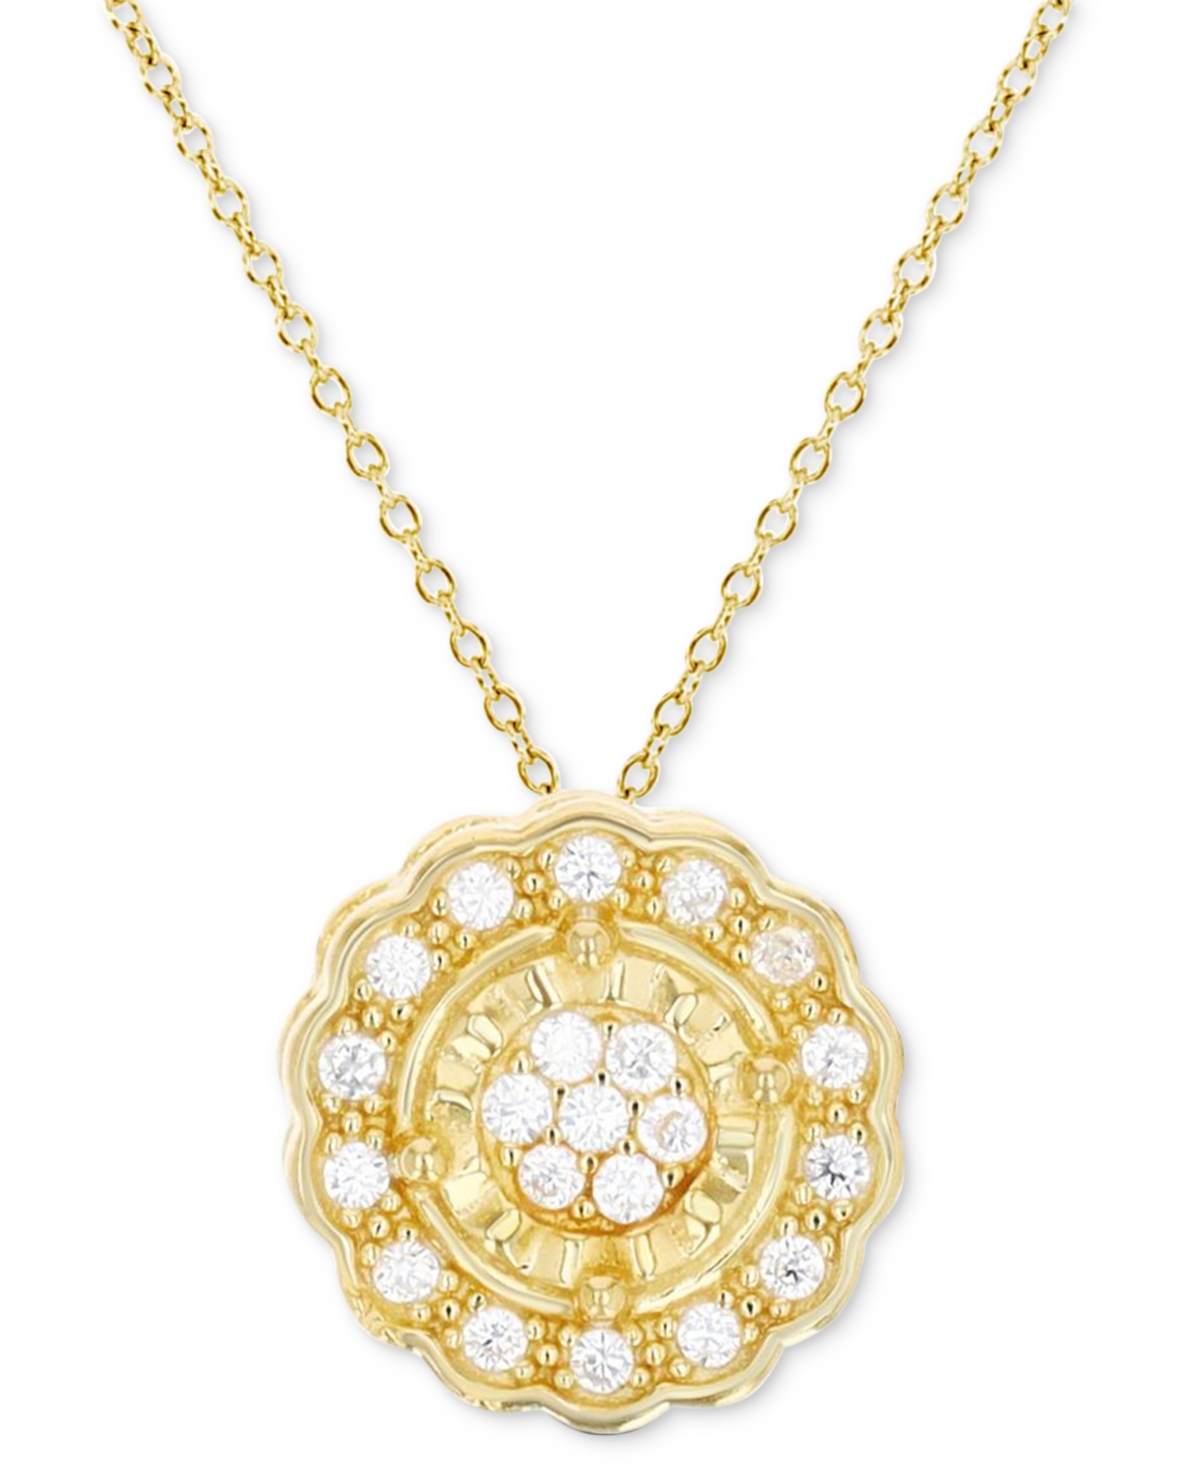 Cubic Zirconia Circle Halo Cluster 18" Pendant Necklace in 14k Gold-Plated Sterling Silver - Gold